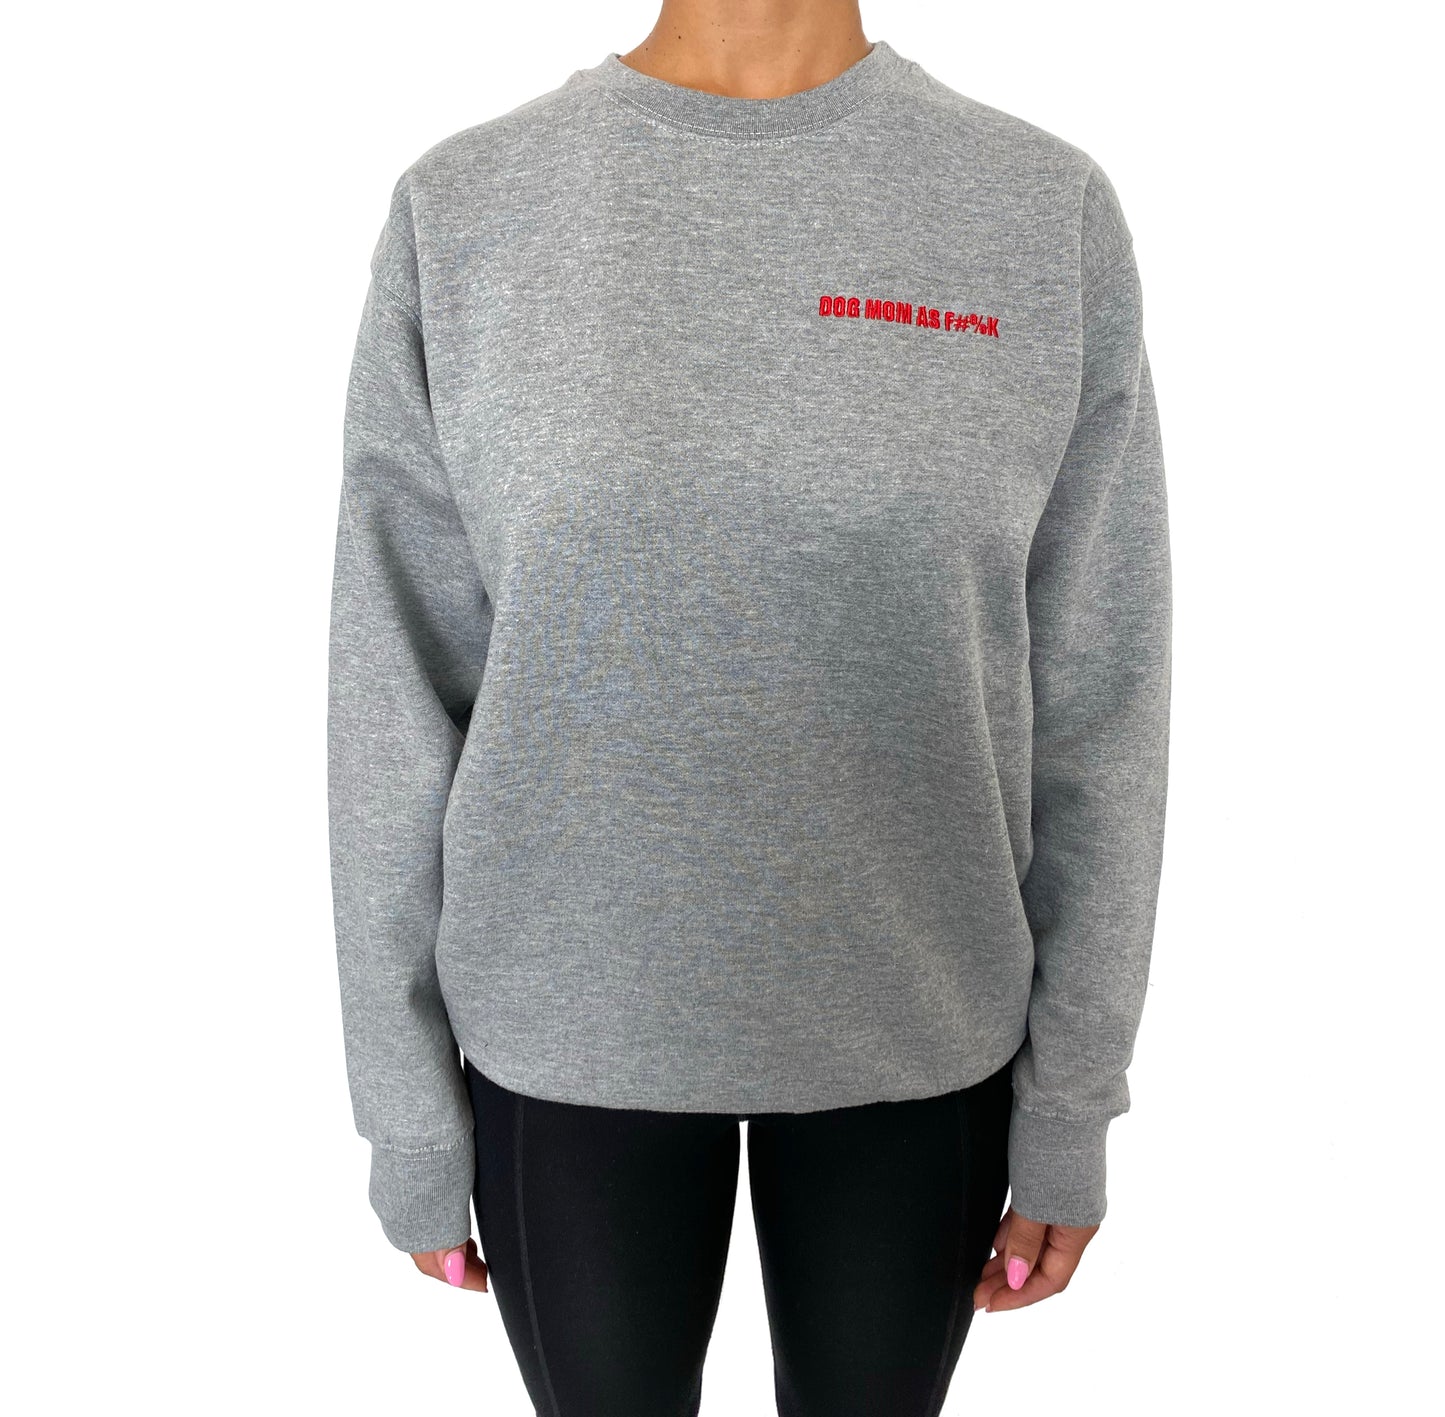 GREY DOG MOM AF COTTON BLEND CREWNECK SWEATSHIRT WITH RED EMBROIDERED TEXT | TRILL PAWS 